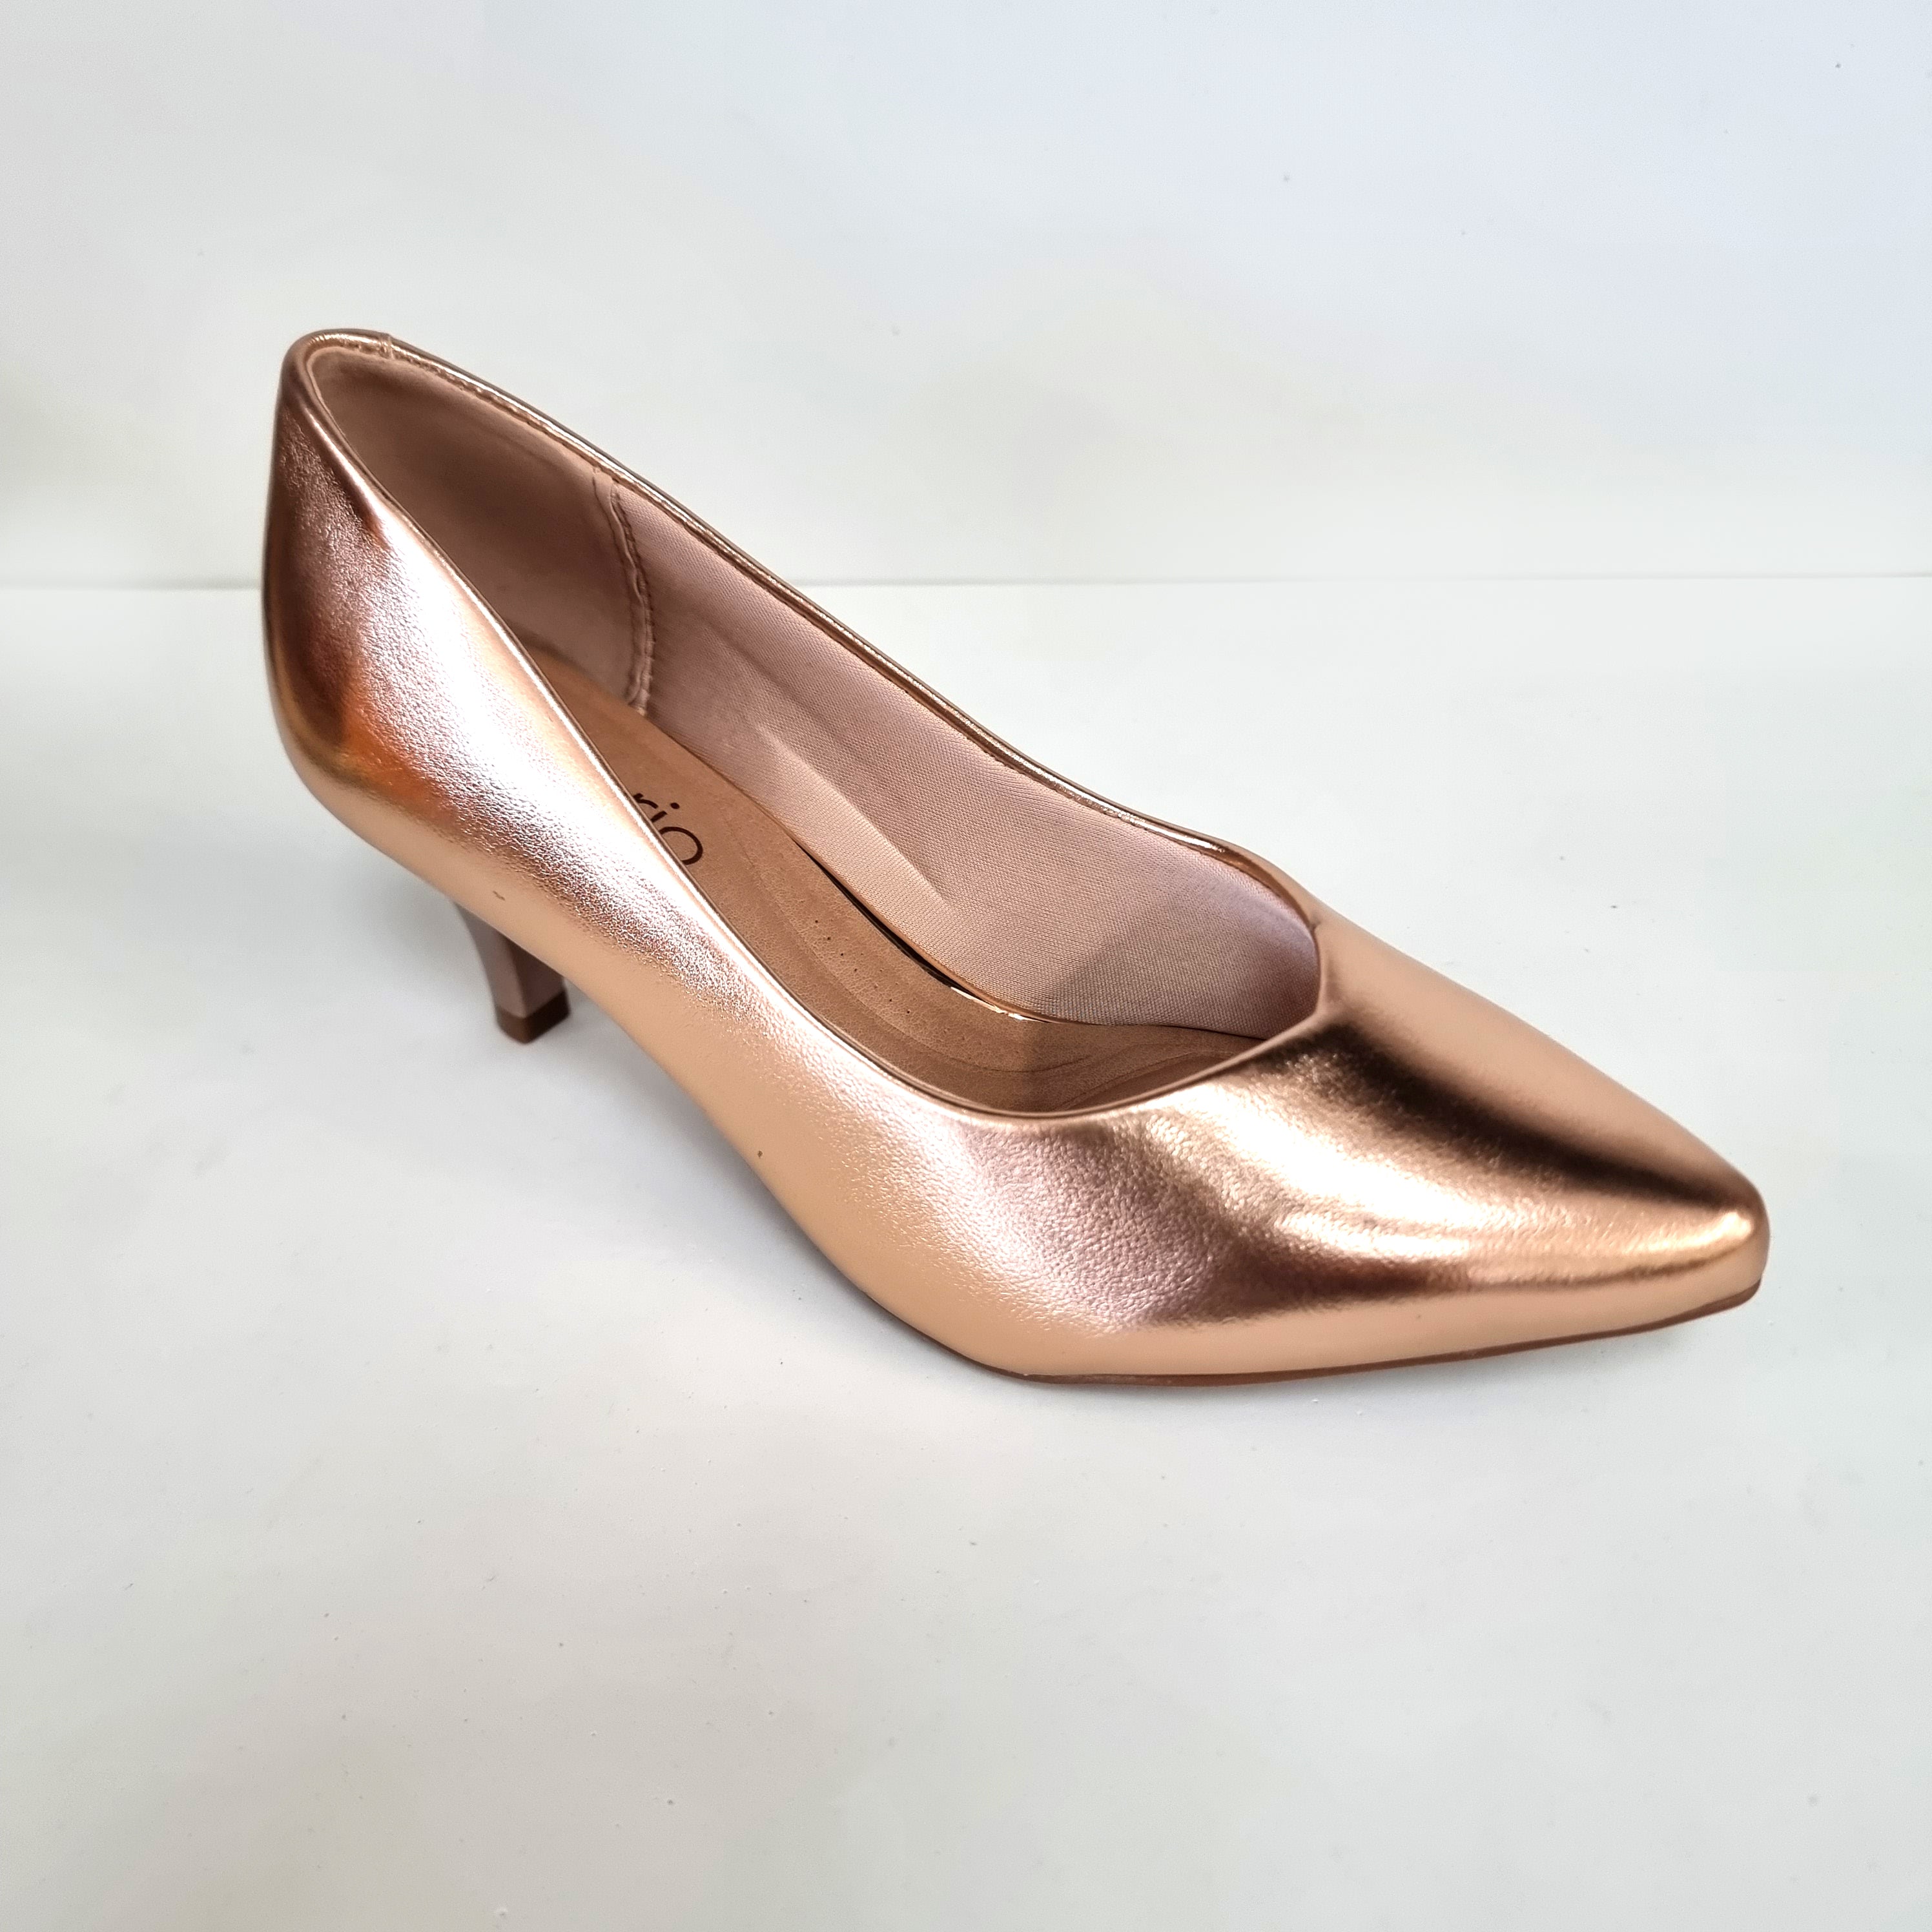 Beirra Rio 4076-1101 Pointy Toe Pump in Rose Gold Napa